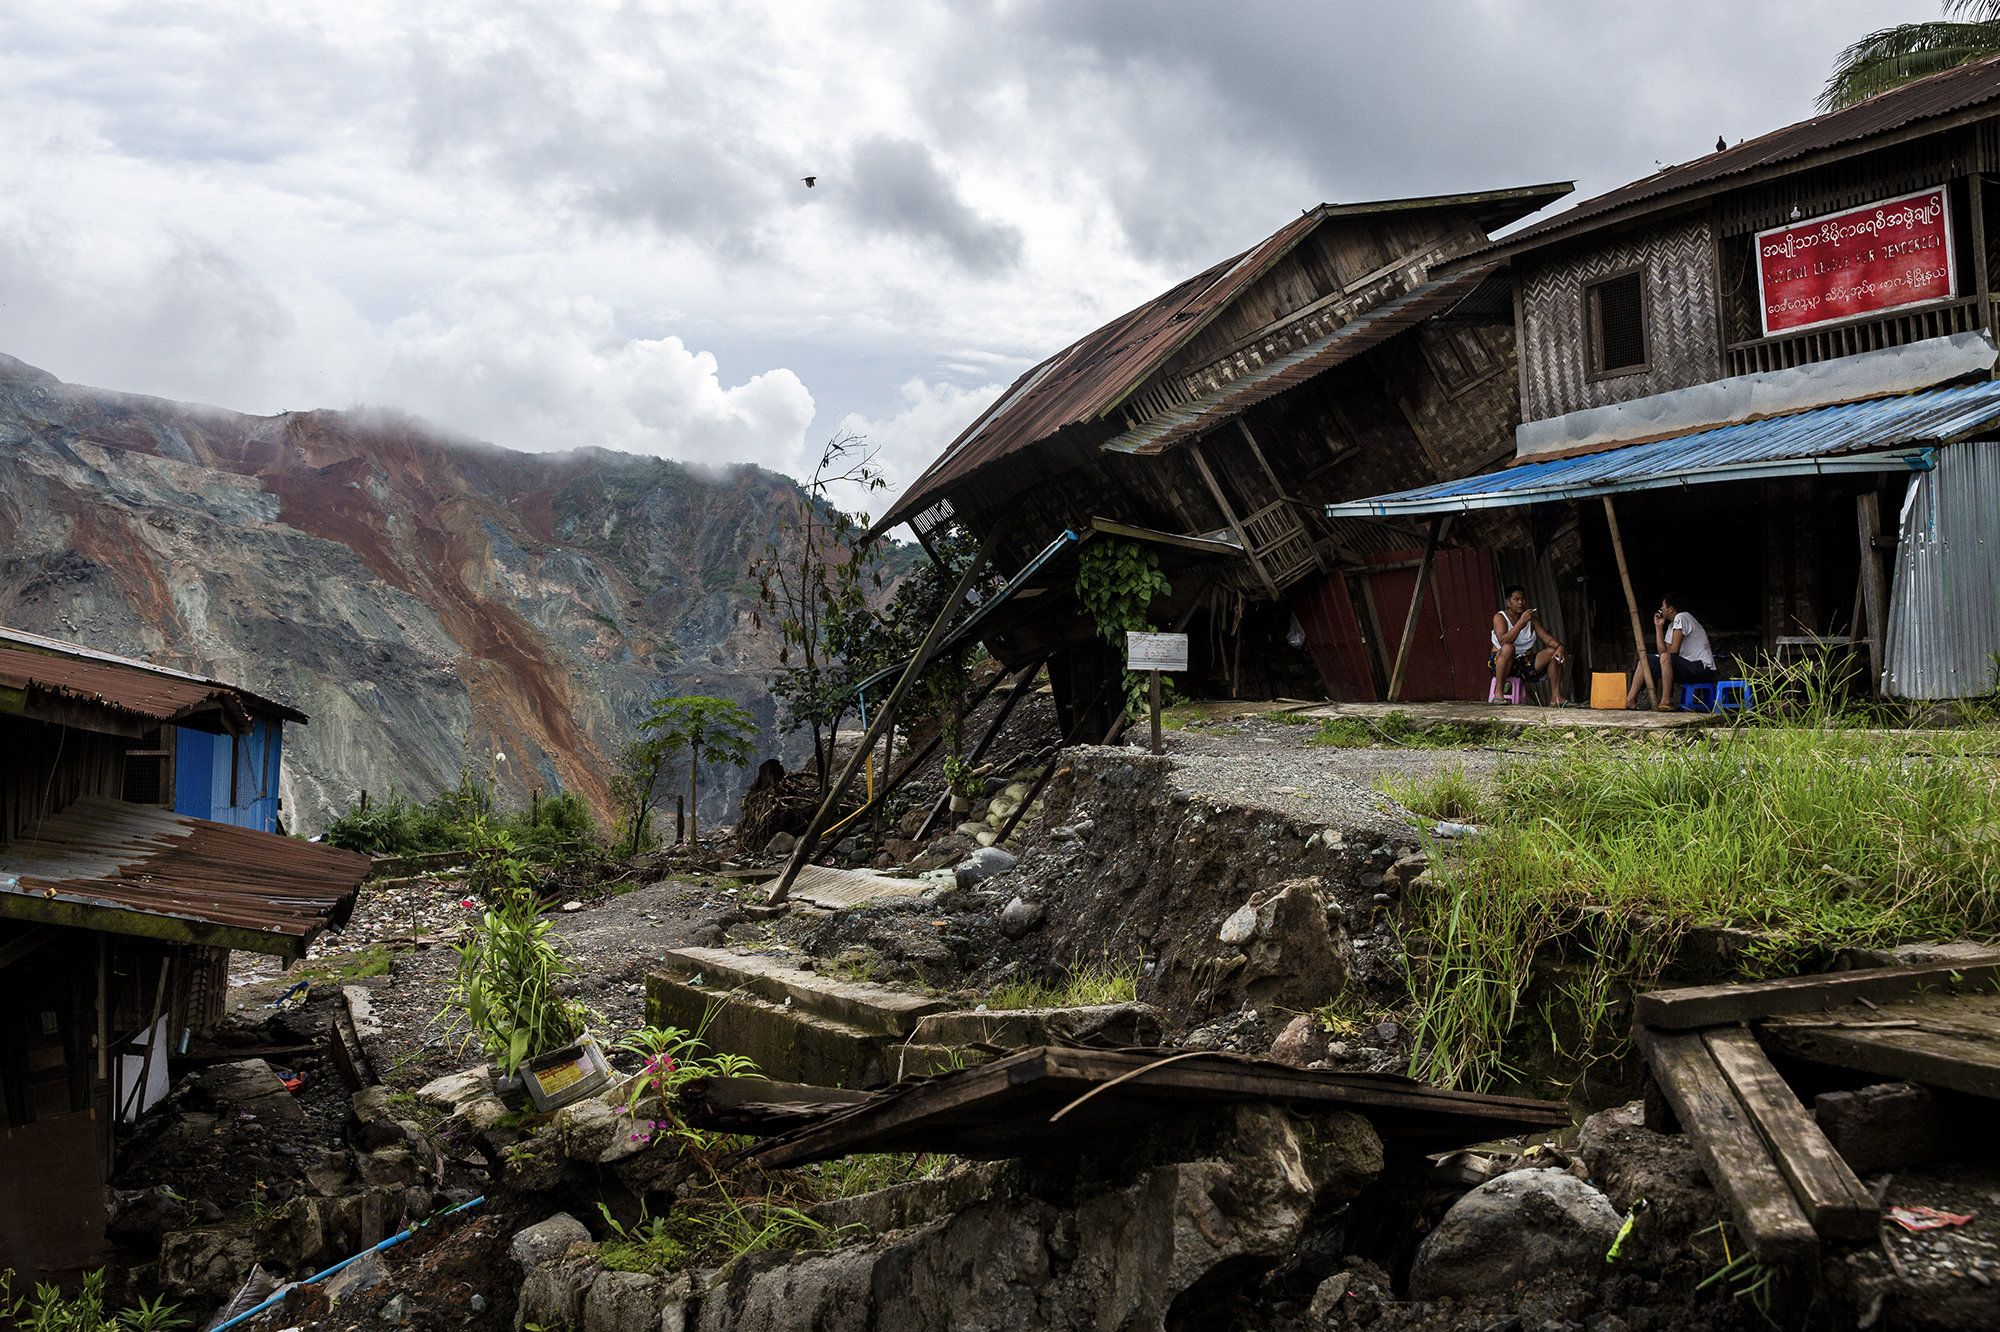 Residents sit near a damaged house caused by a landslide at a mining site in Hpakant in July. The landslide killed nearly 200 people. Image by Hkun Lat. Myanmar, 2020.